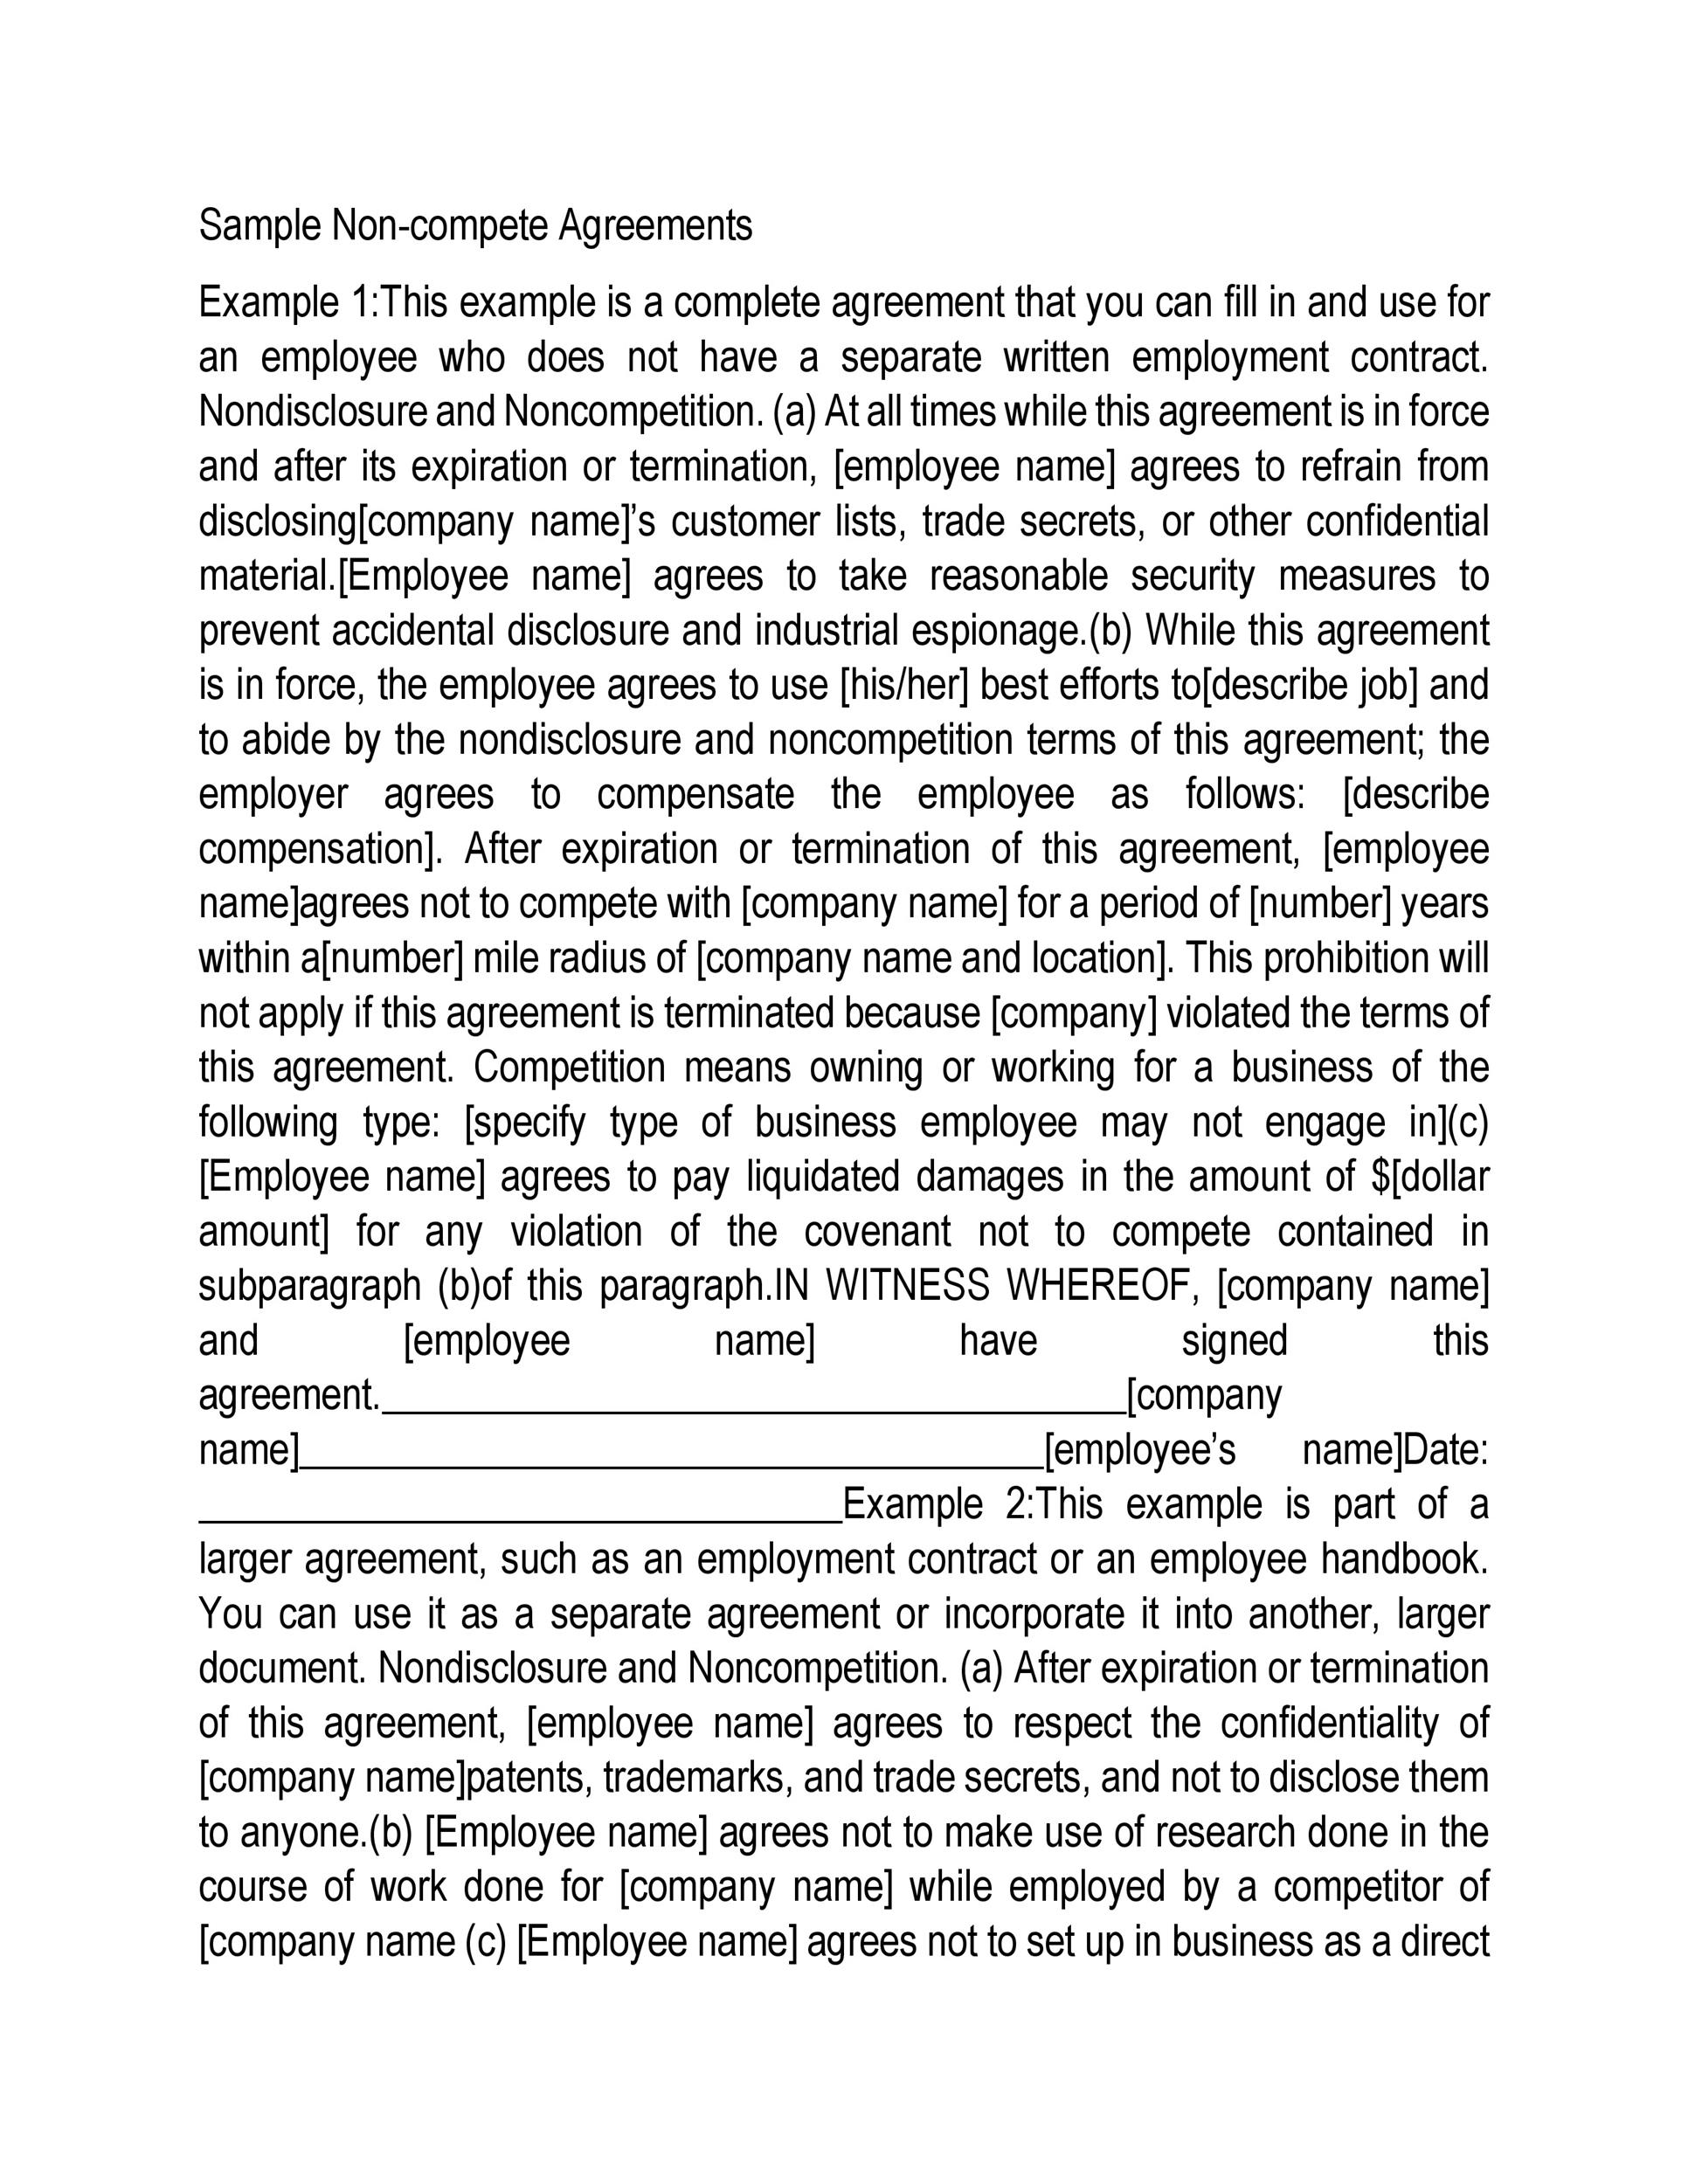 Free Non-Compete Agreement Template 03